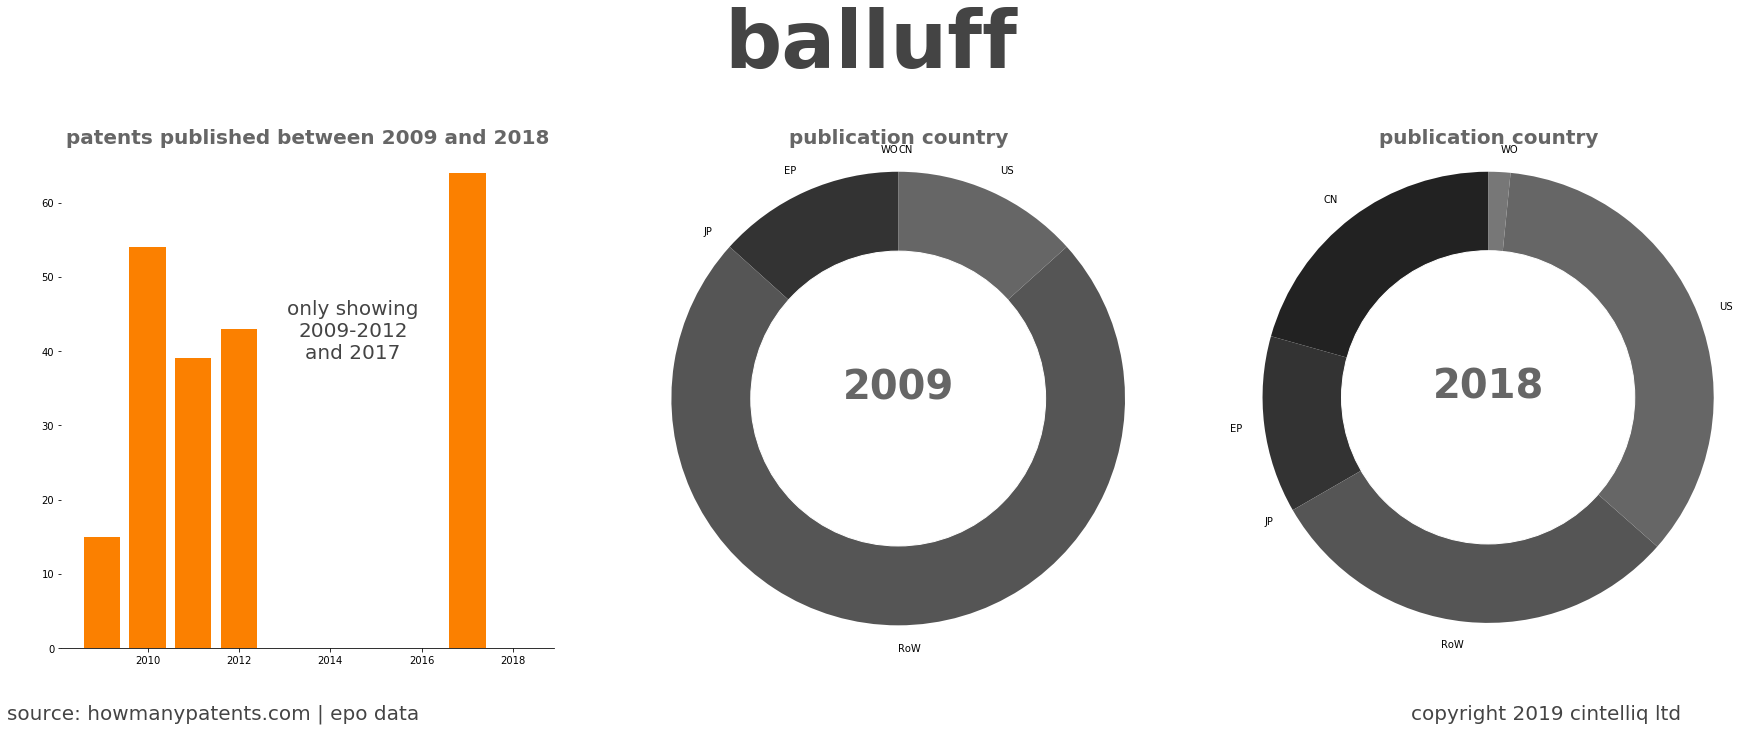 summary of patents for Balluff